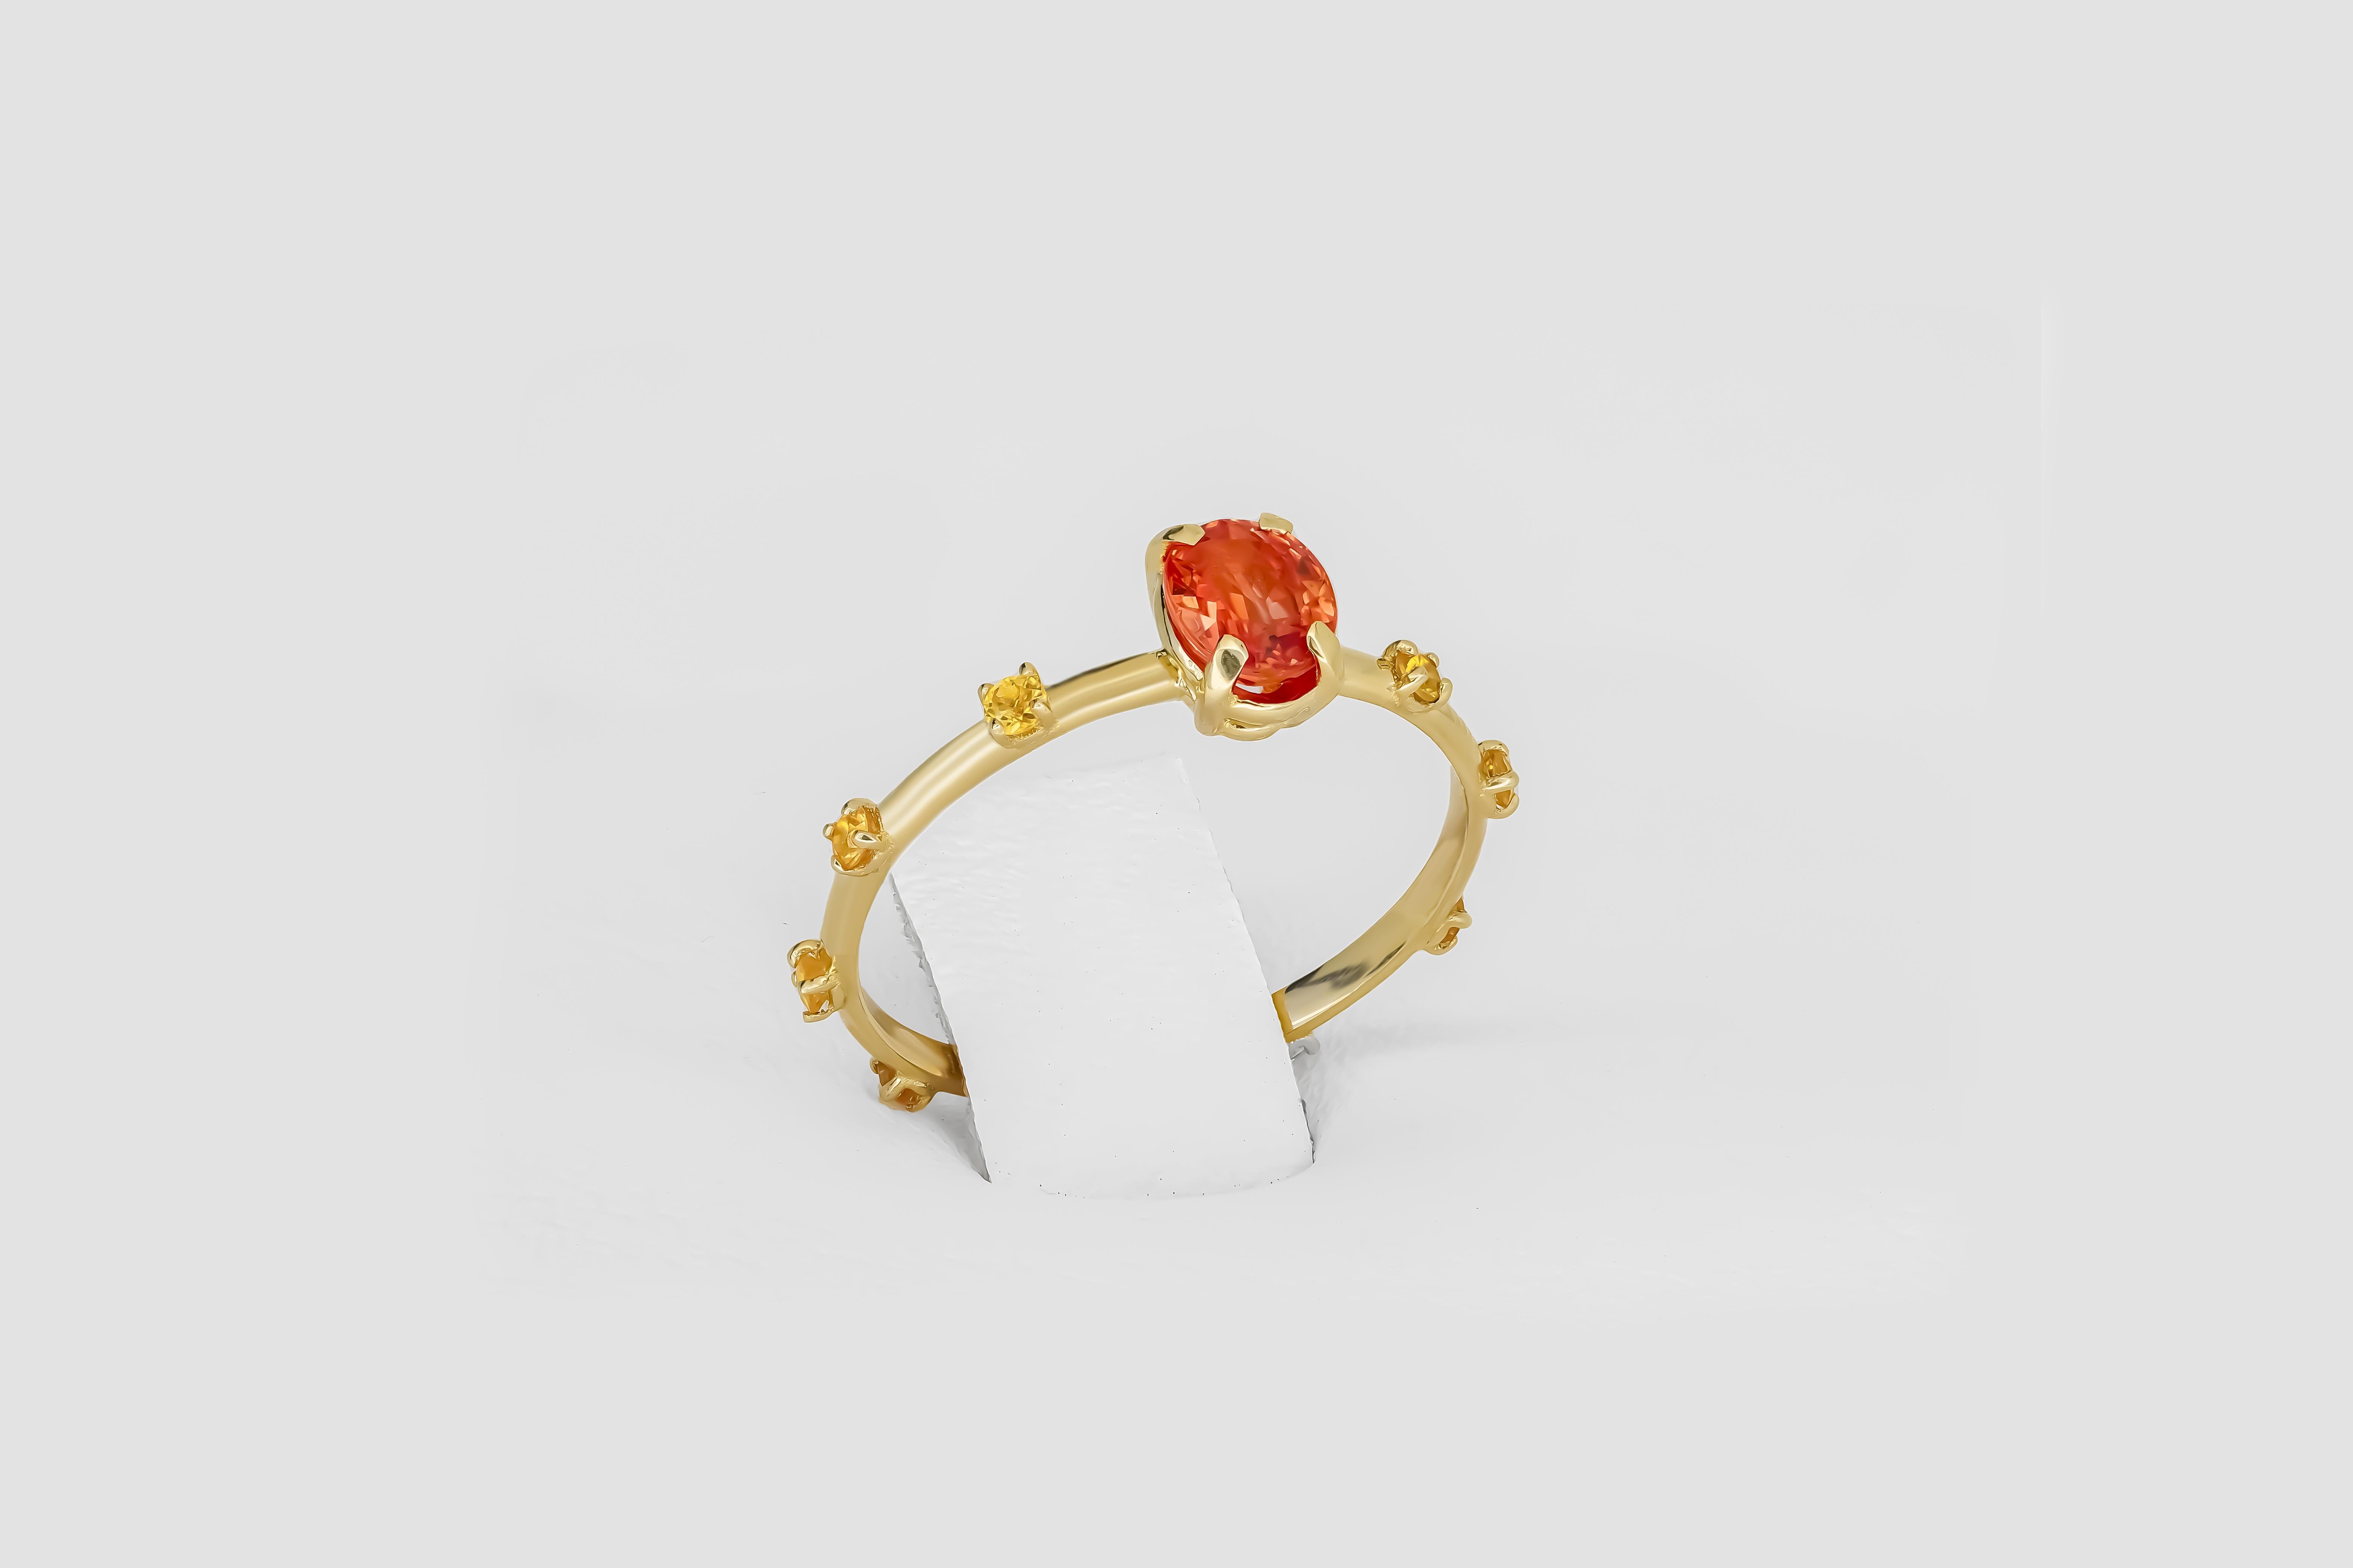 For Sale:  Peach color gemstone 14k gold ring. 5